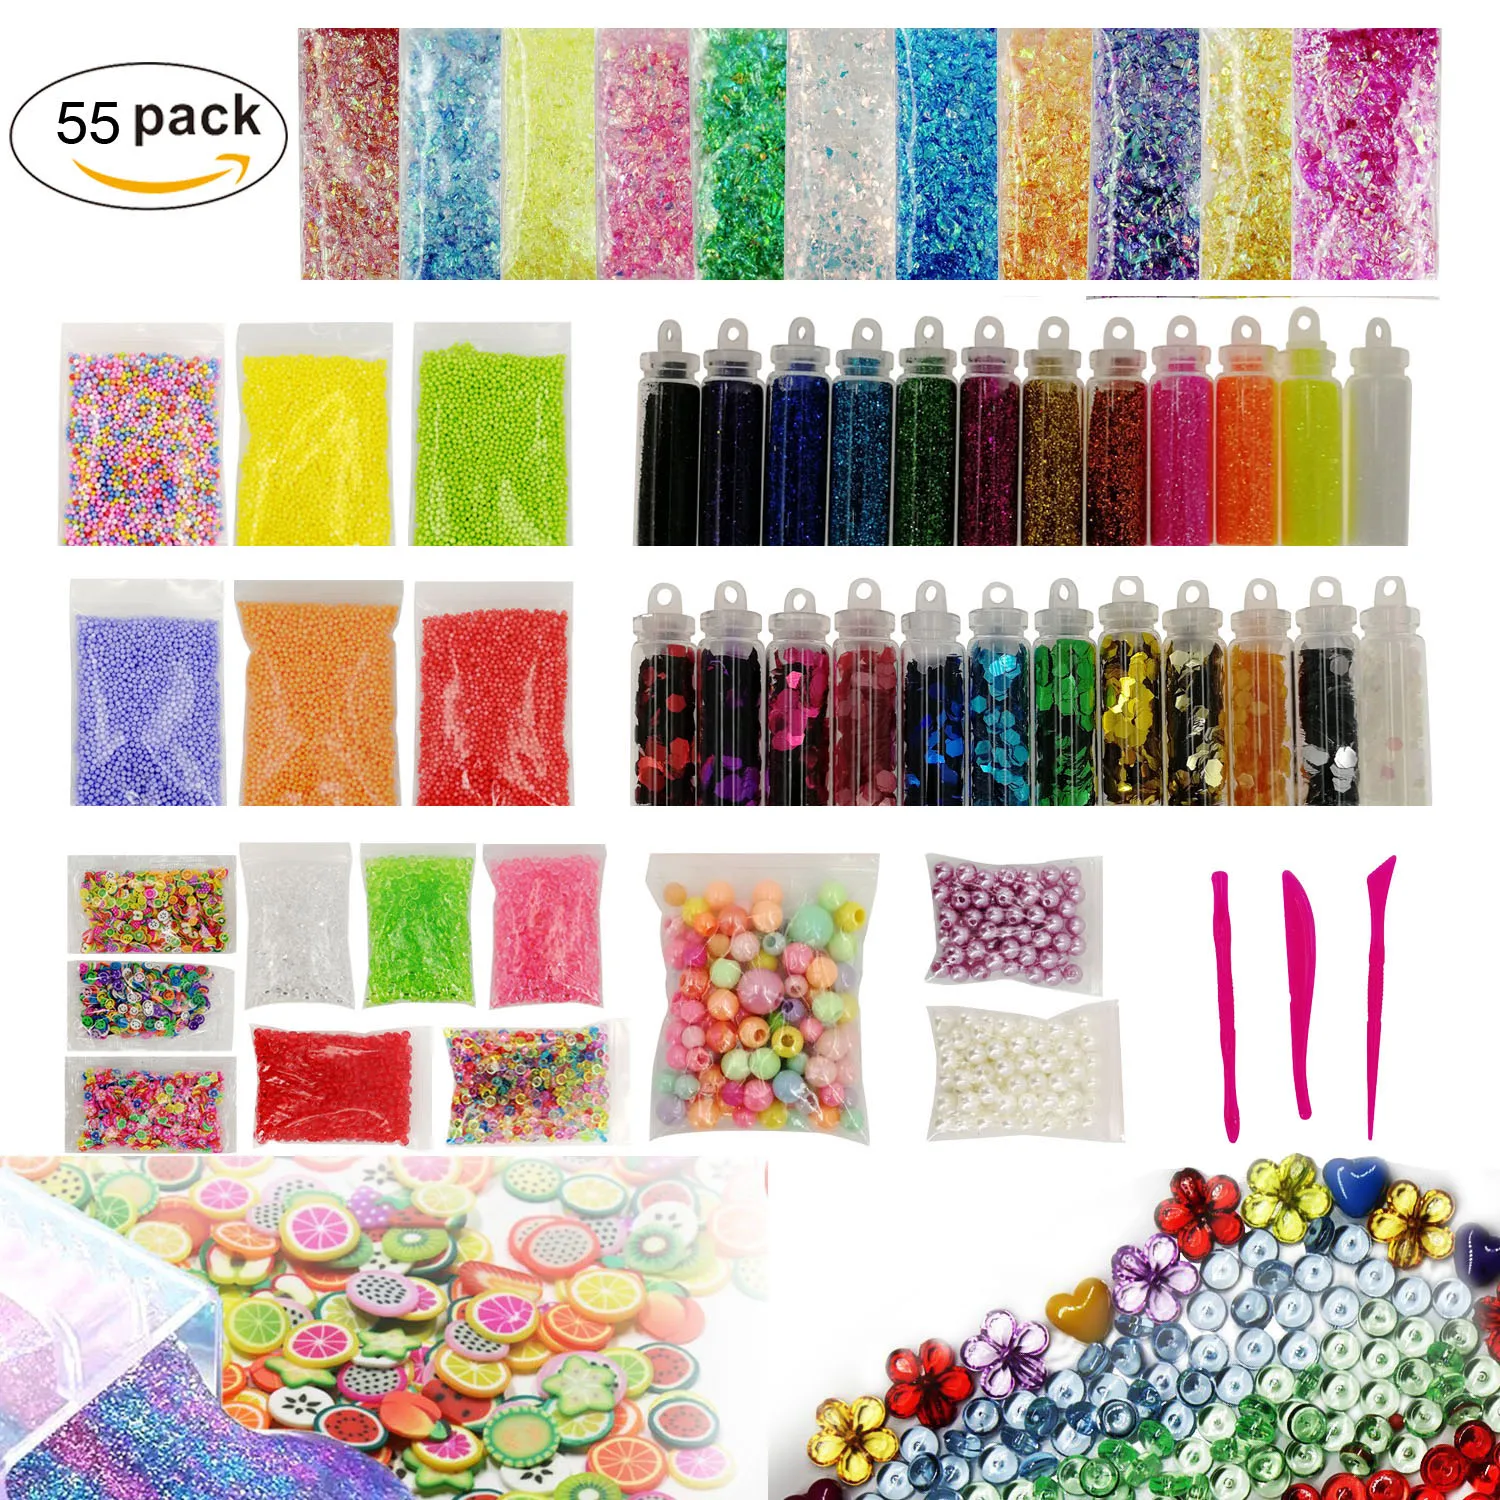 2019 Hot Selling Mixed Slime Kit Supplies Stuff Slime Supplies 55 Pack ...